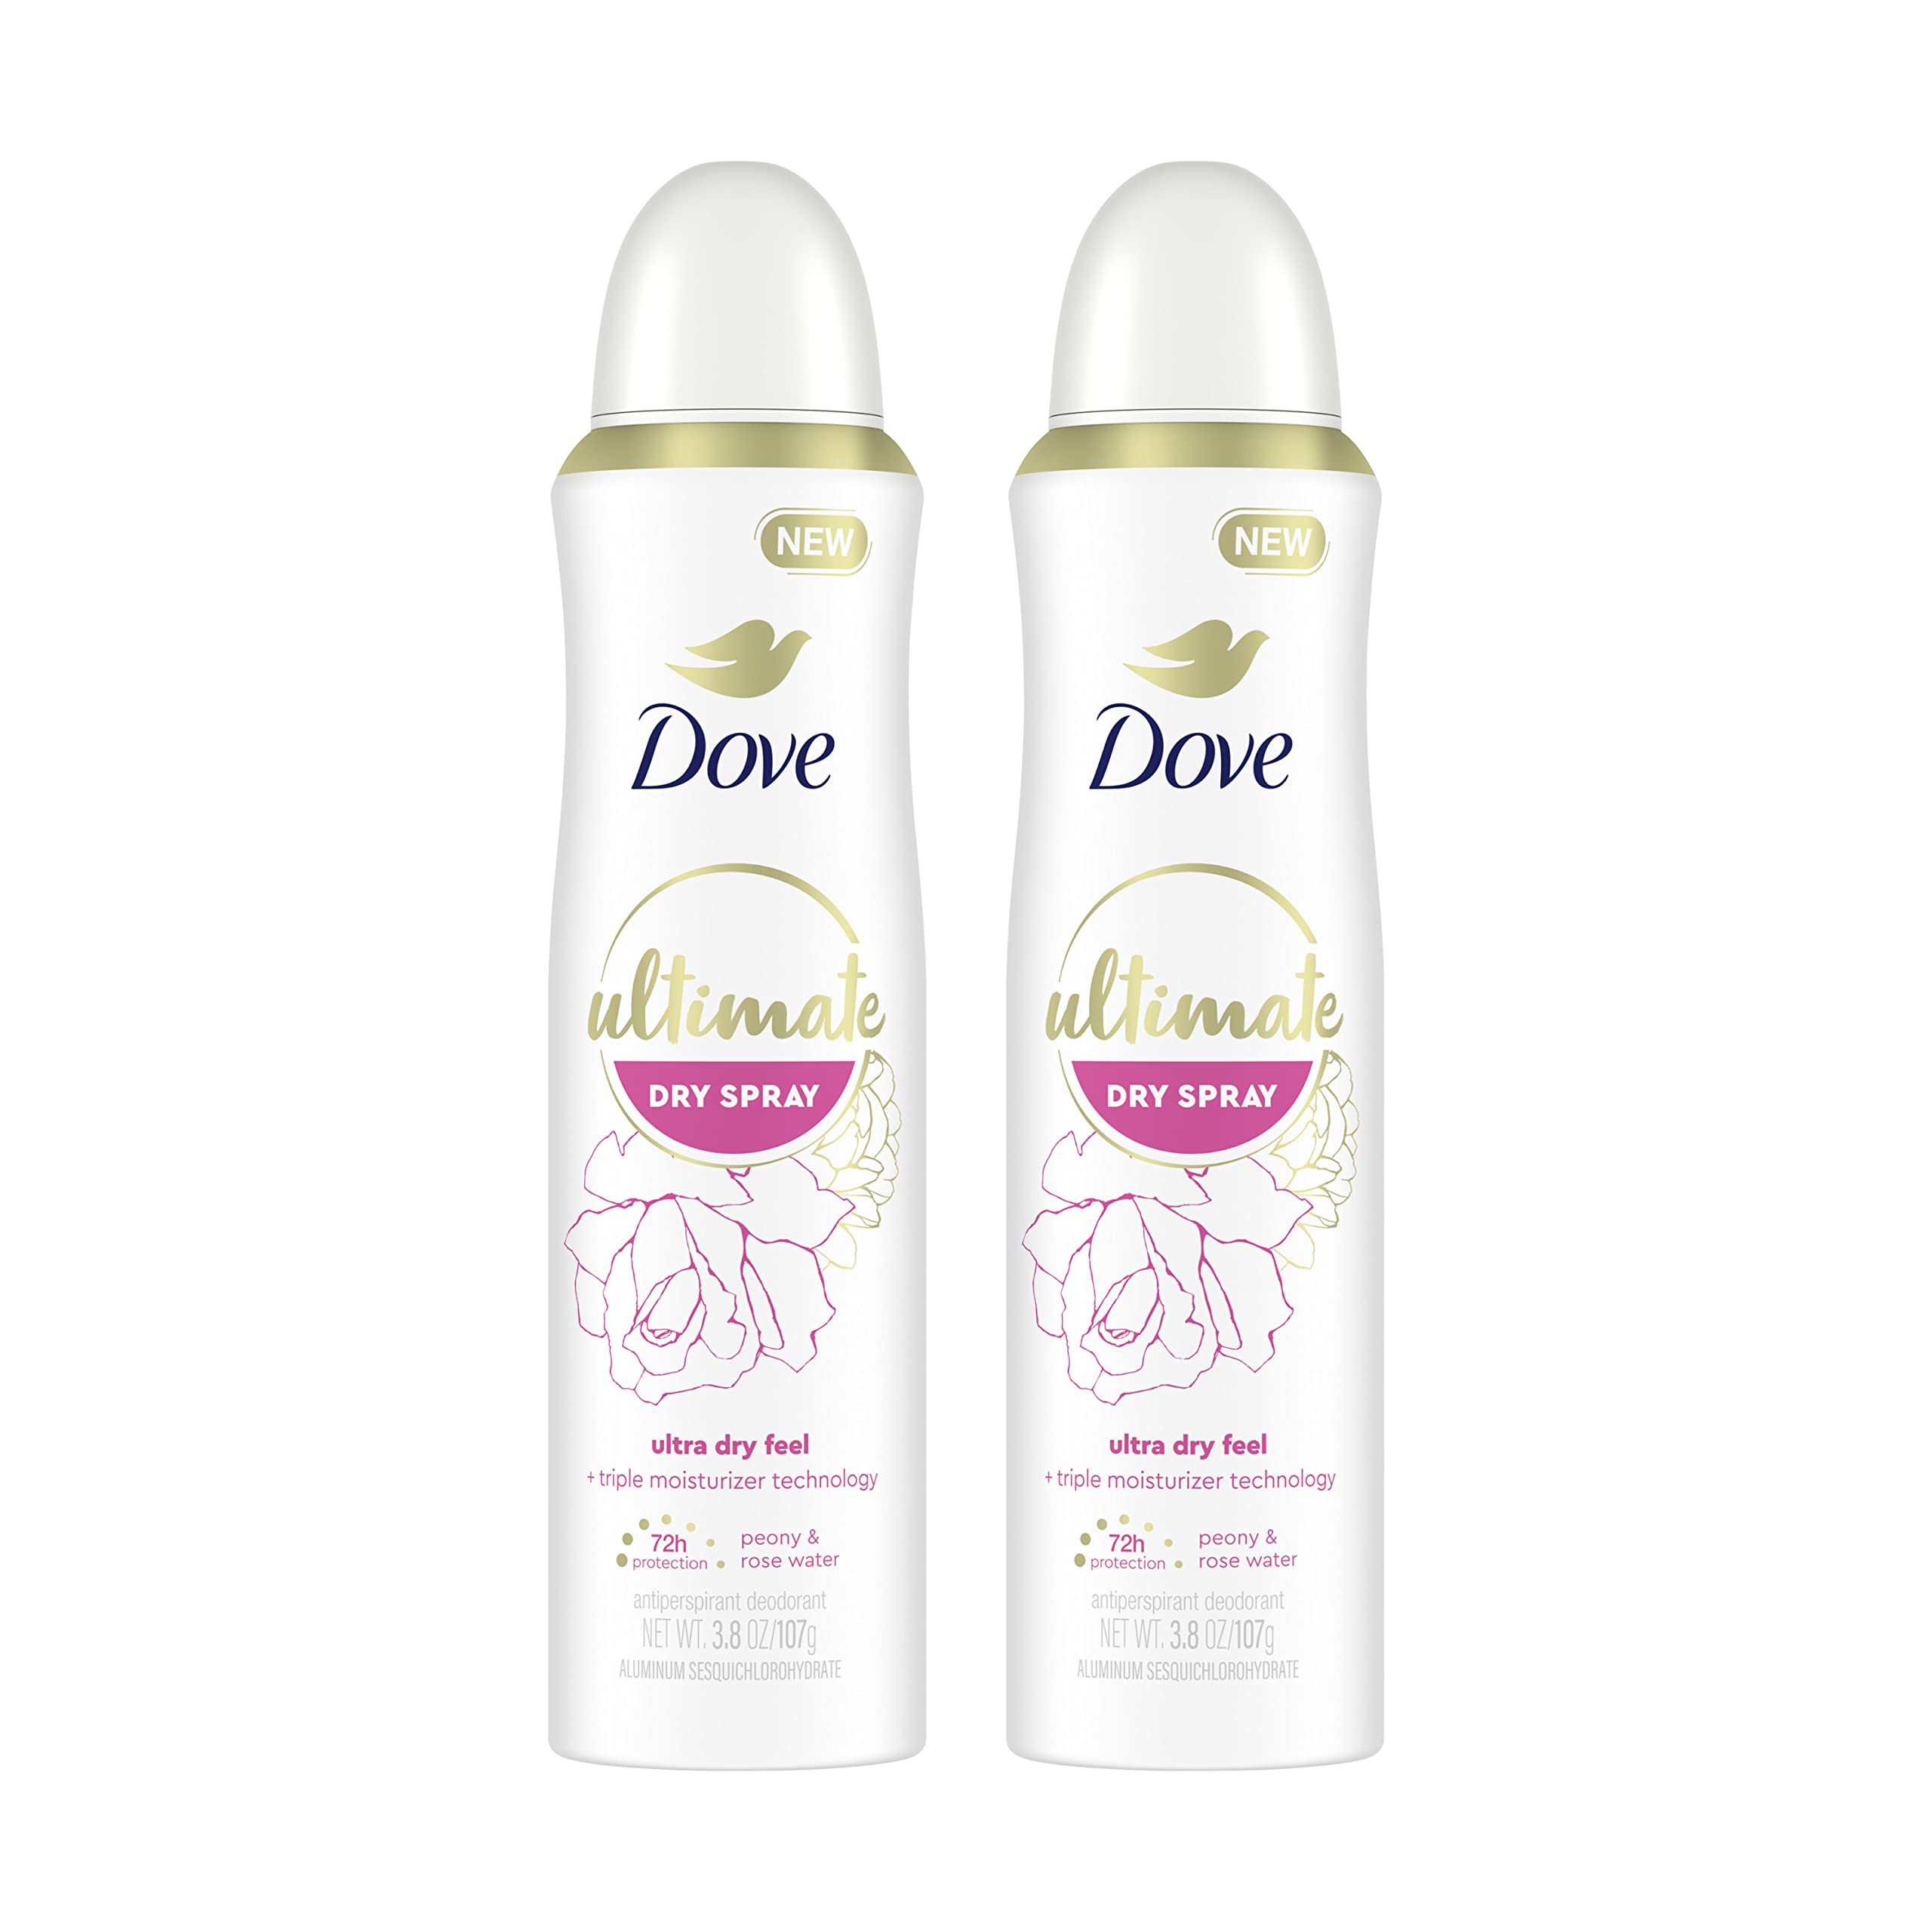 Dove Ultimate Dry Spray Antiperspirant Peony And Rose Water 2 Count For 72-Hour Sweat And Odor Protection With Triple Moisturizer Technology 3.8oz